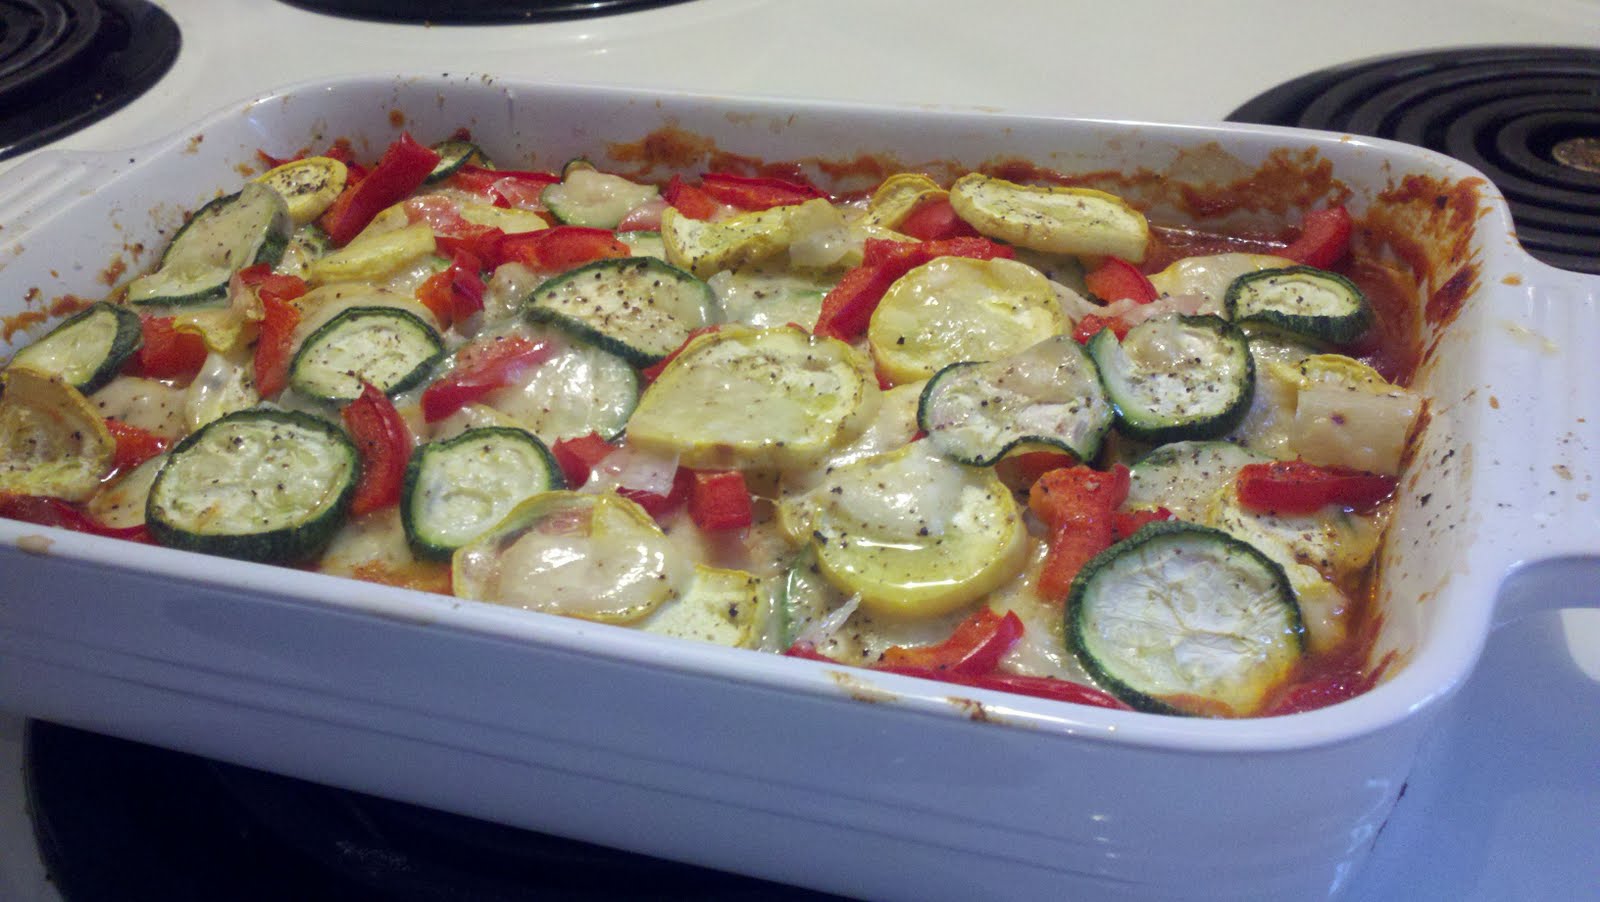 Real Meals in a Pinch: Clean Out the Fridge Ratatouille